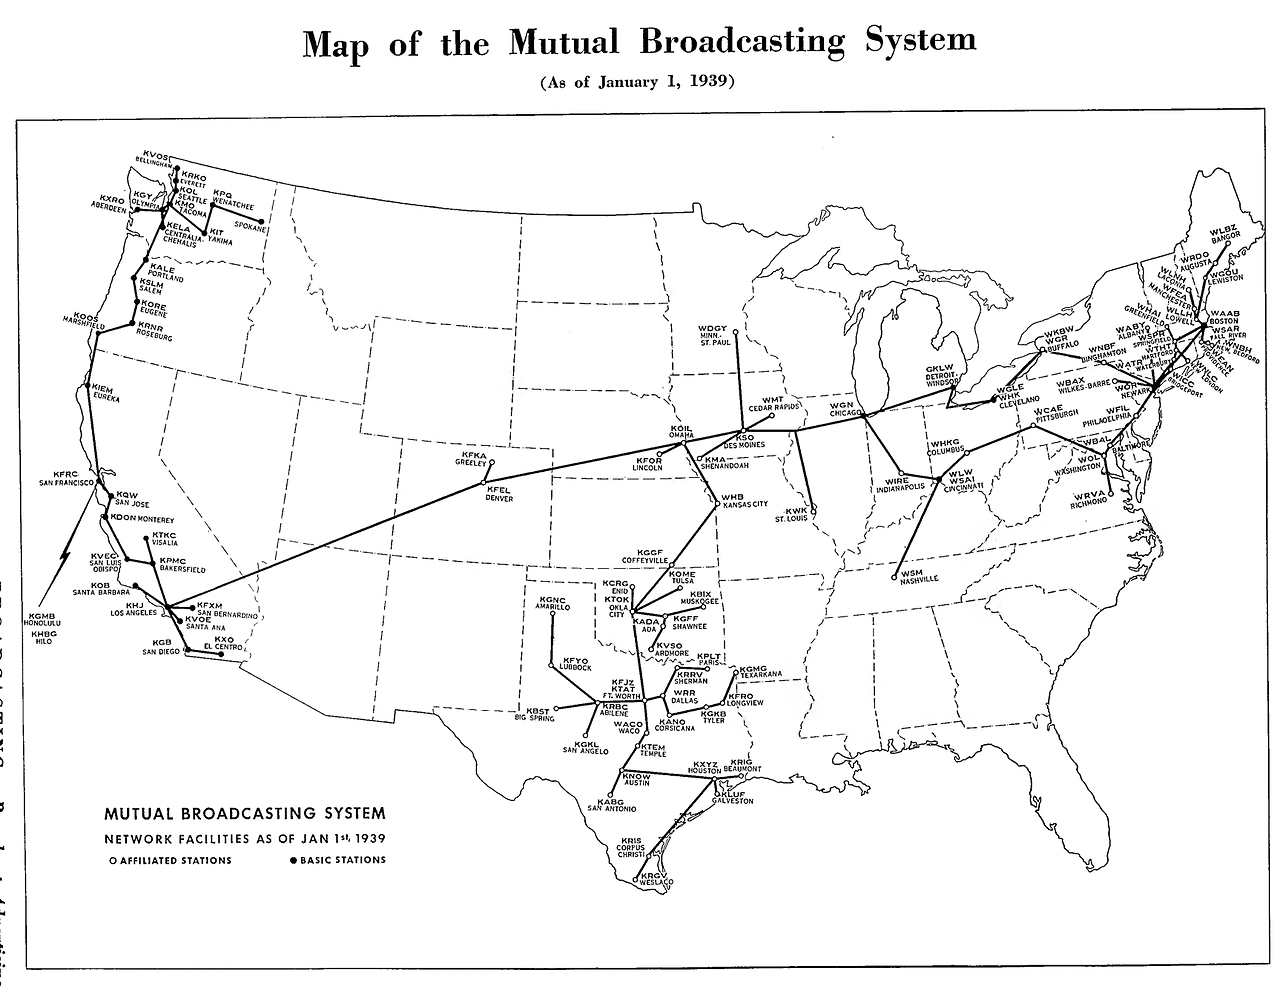 FADED SIGNALS: A 1939 map of the Mutual Broadcasting System.